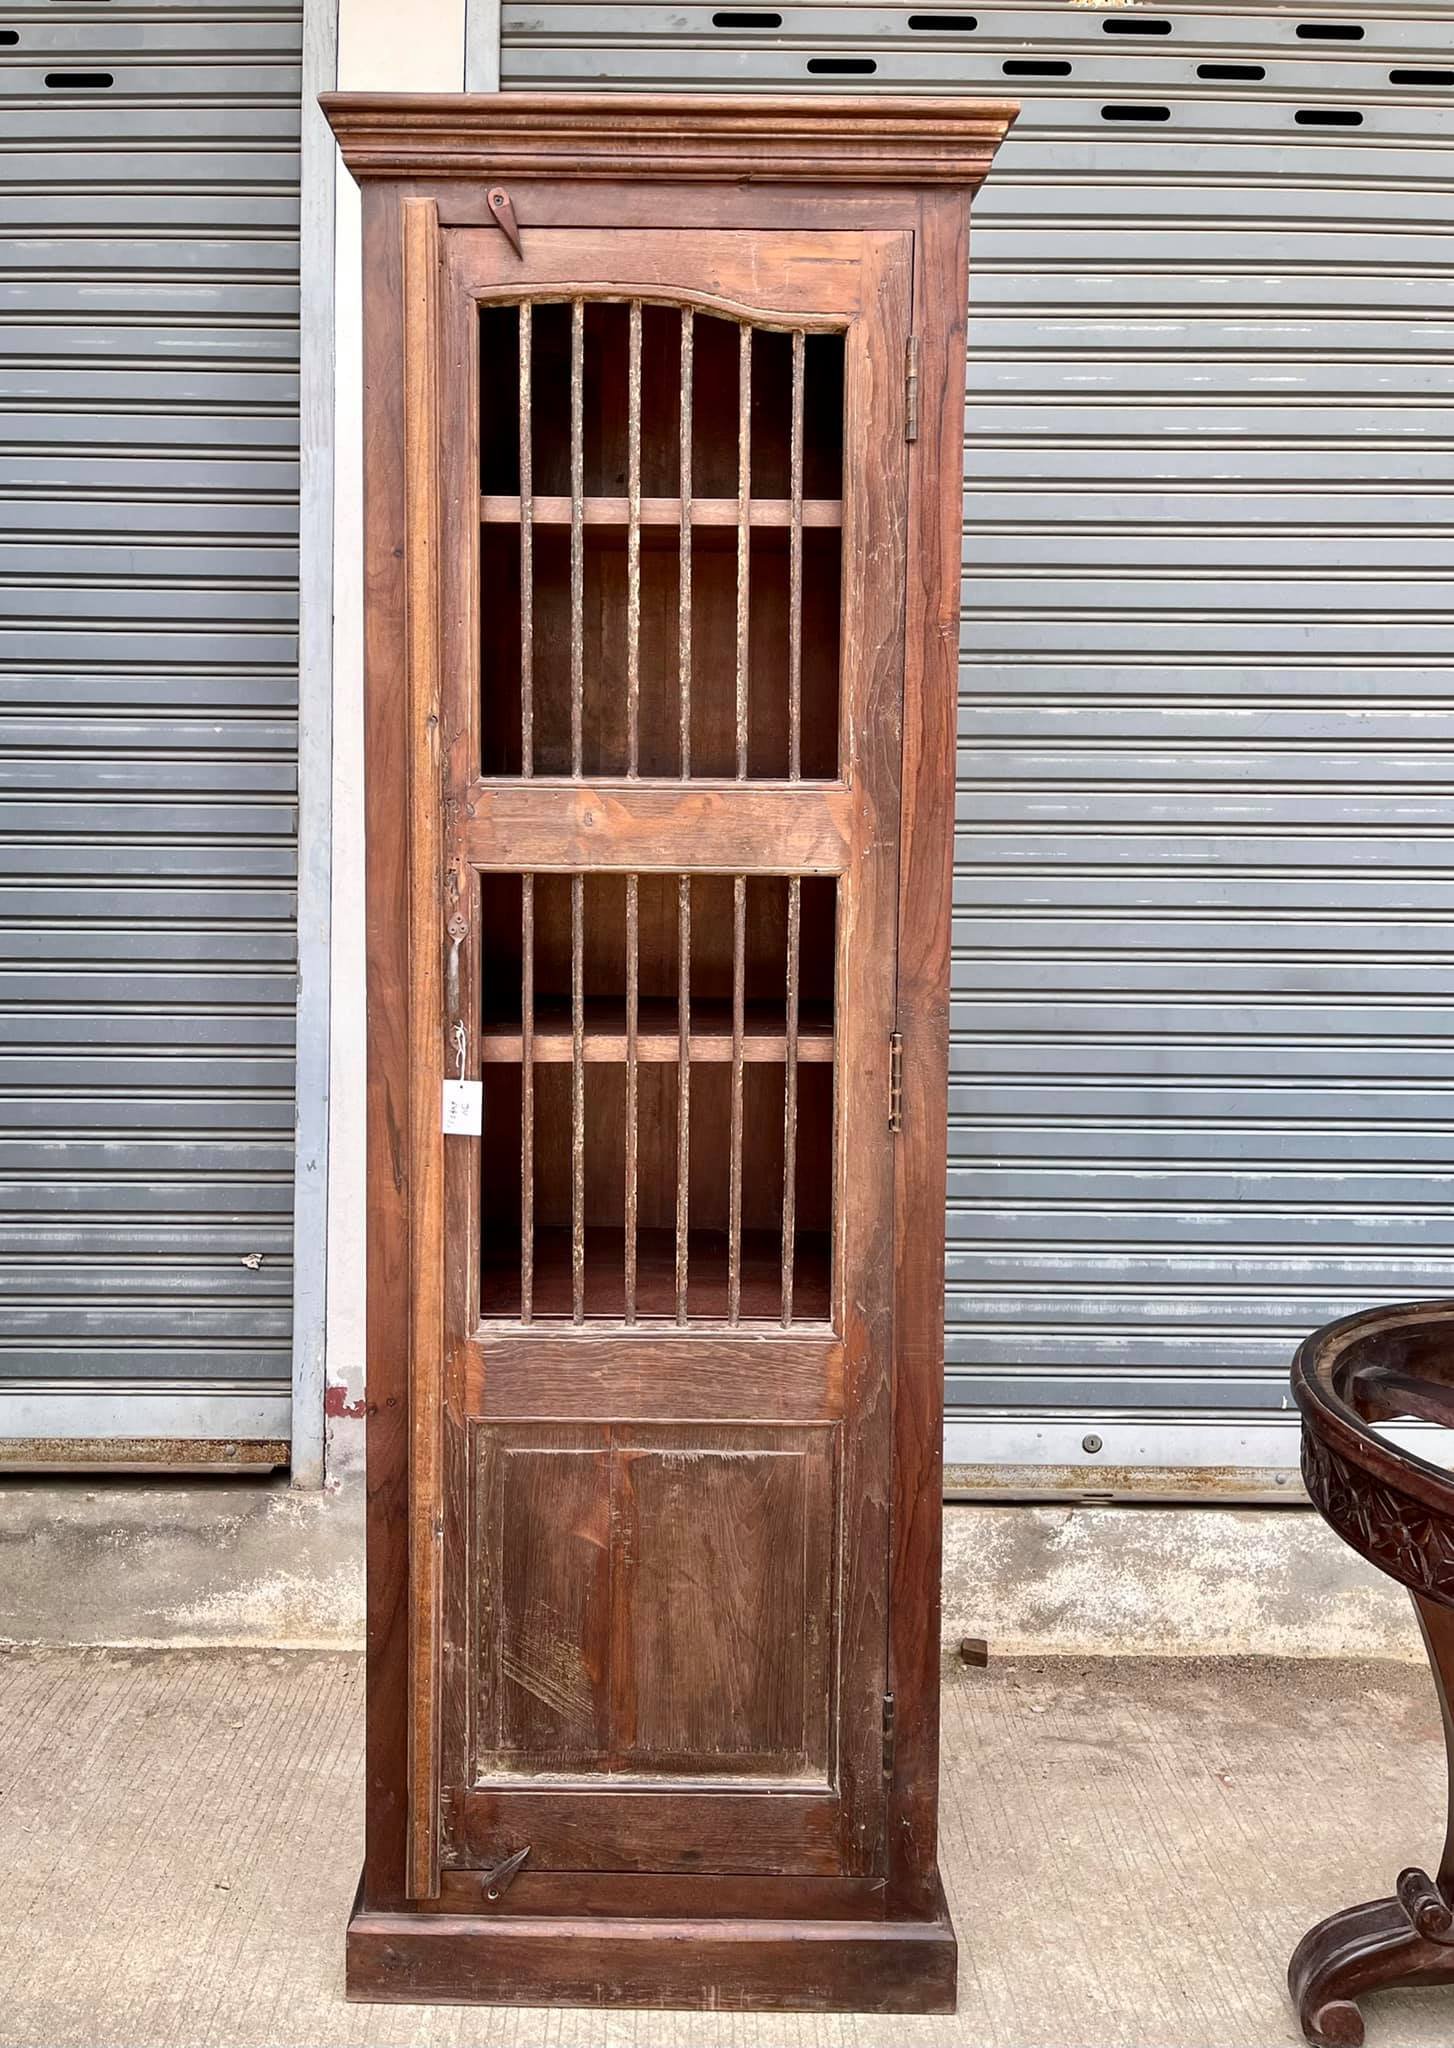 CTL17 Antique Cabinet with Iron Decor